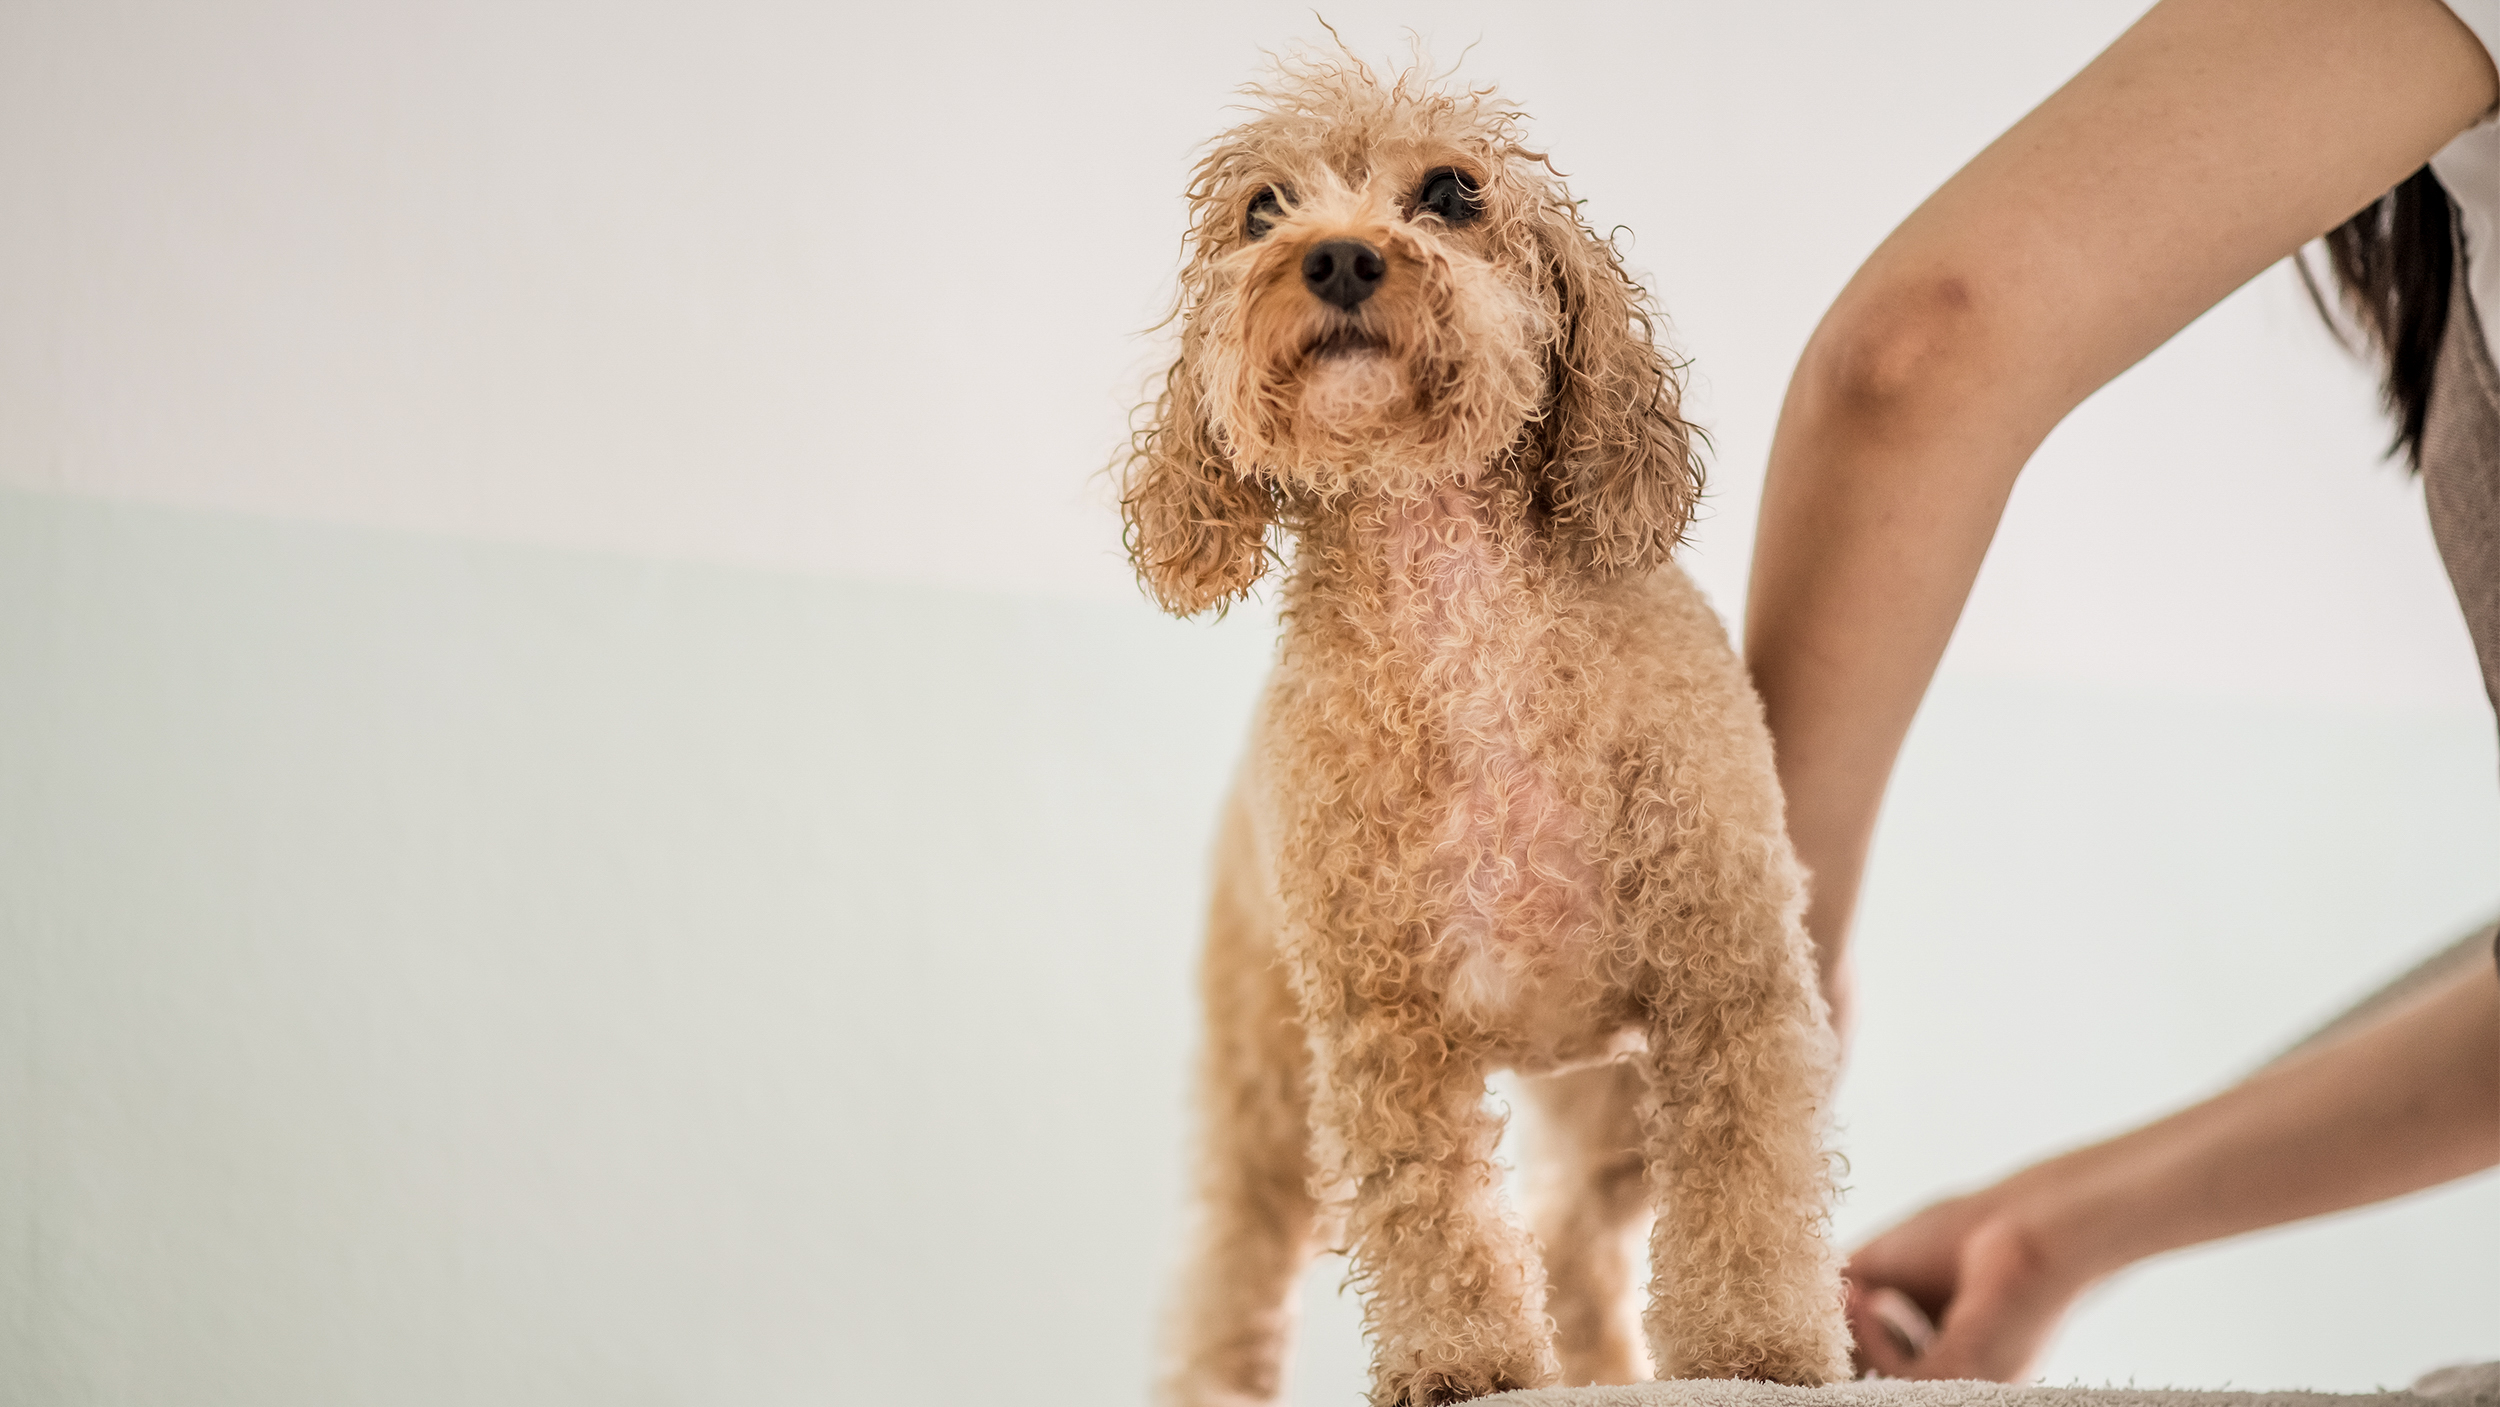 Toy Poodle standing on a towel being brushed by a woman.